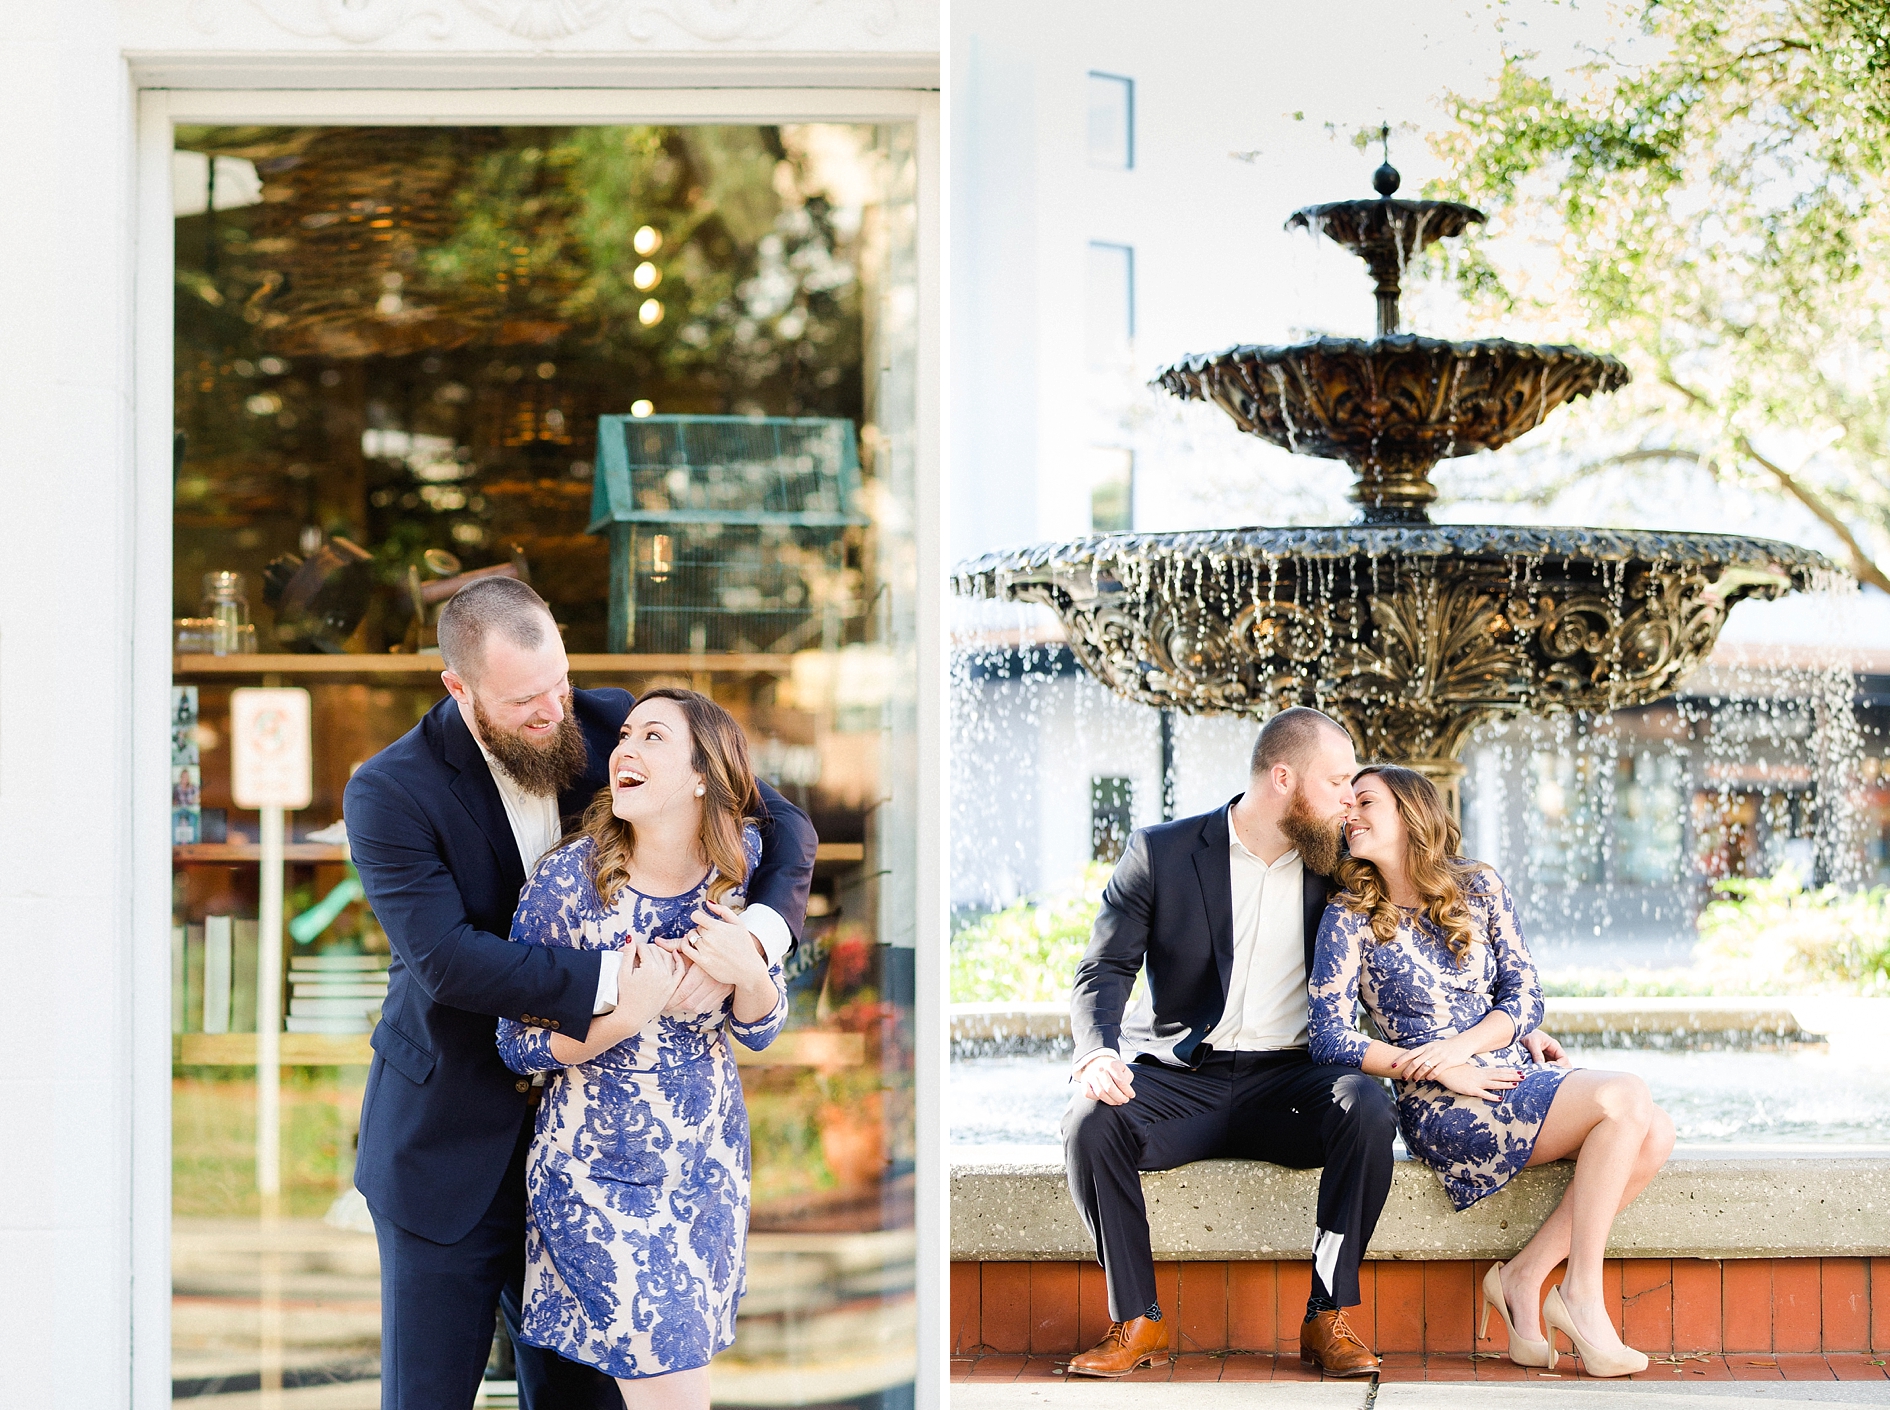 South Tampa Engagement | © Ailyn La Torre Photography 2016